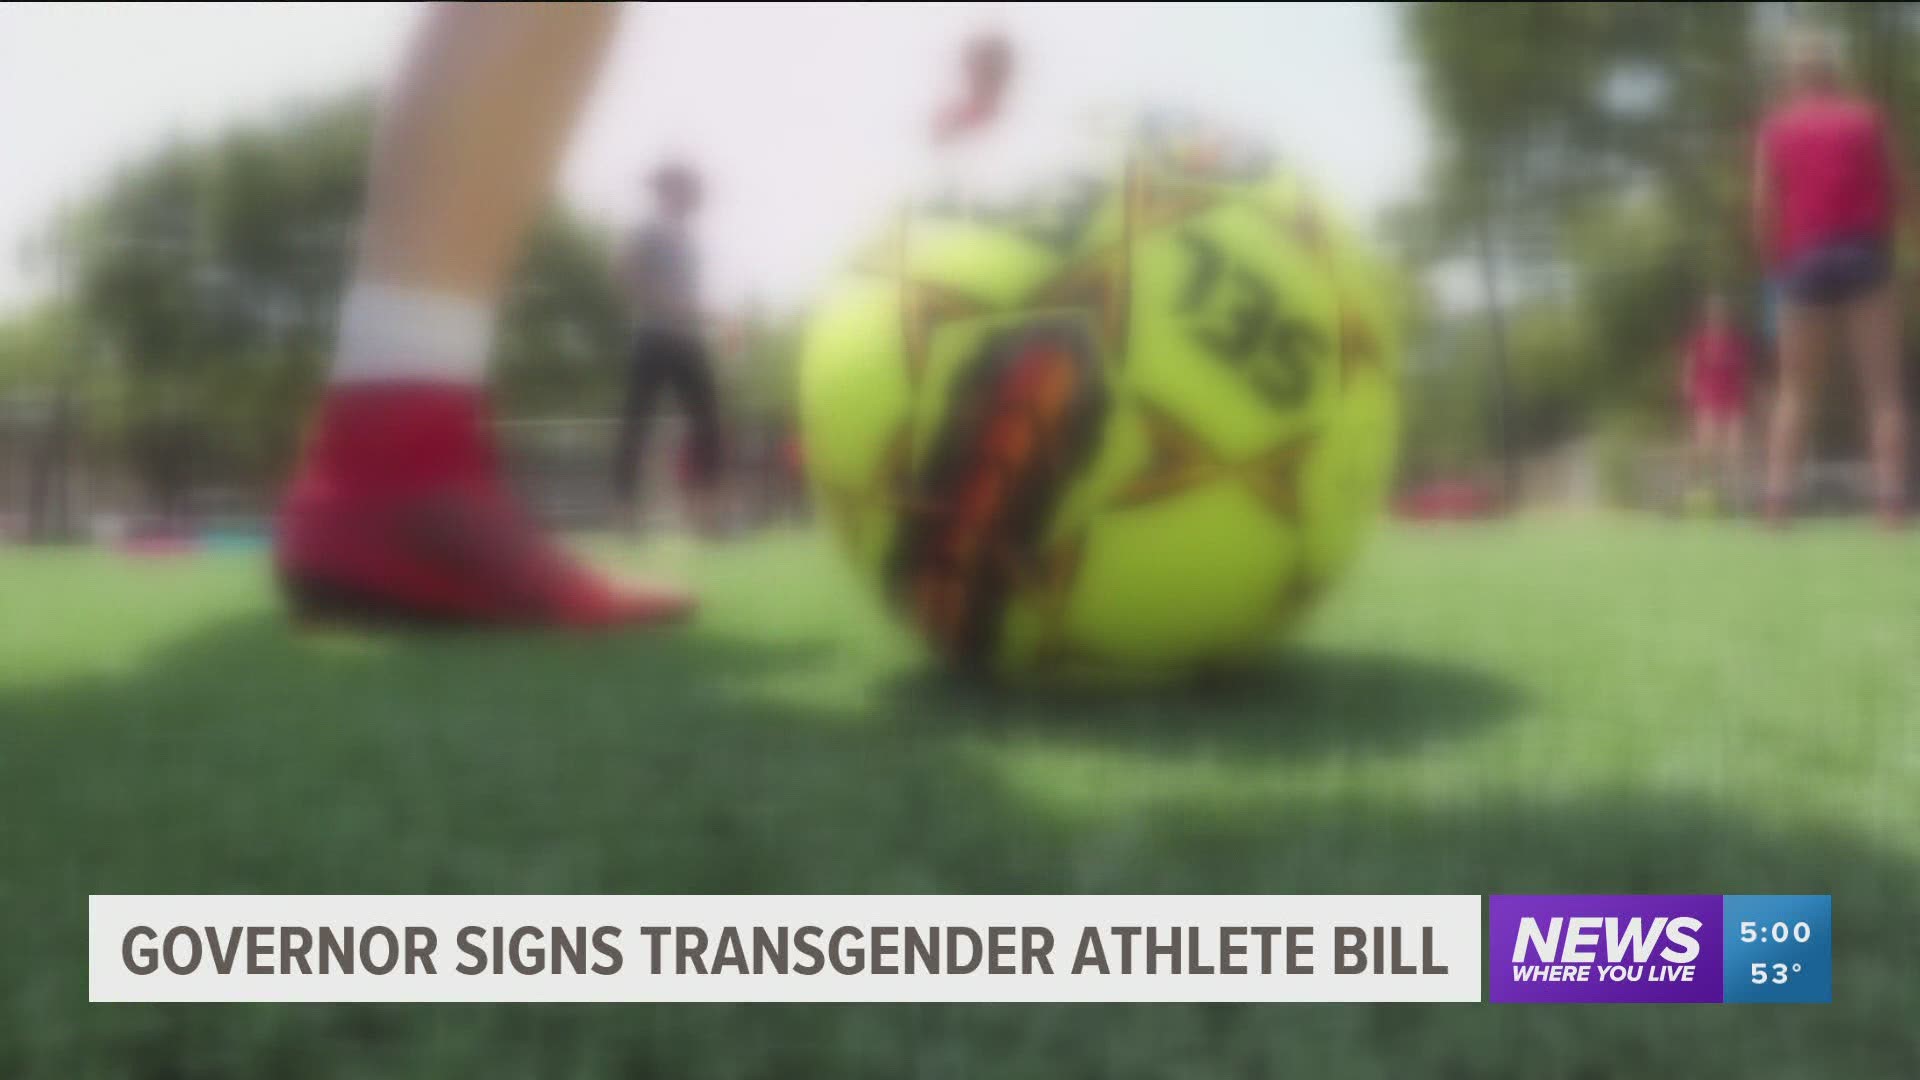 The bill states that transgender women and girls would have a biological advantage over other female competitors, making it an uneven playing field.